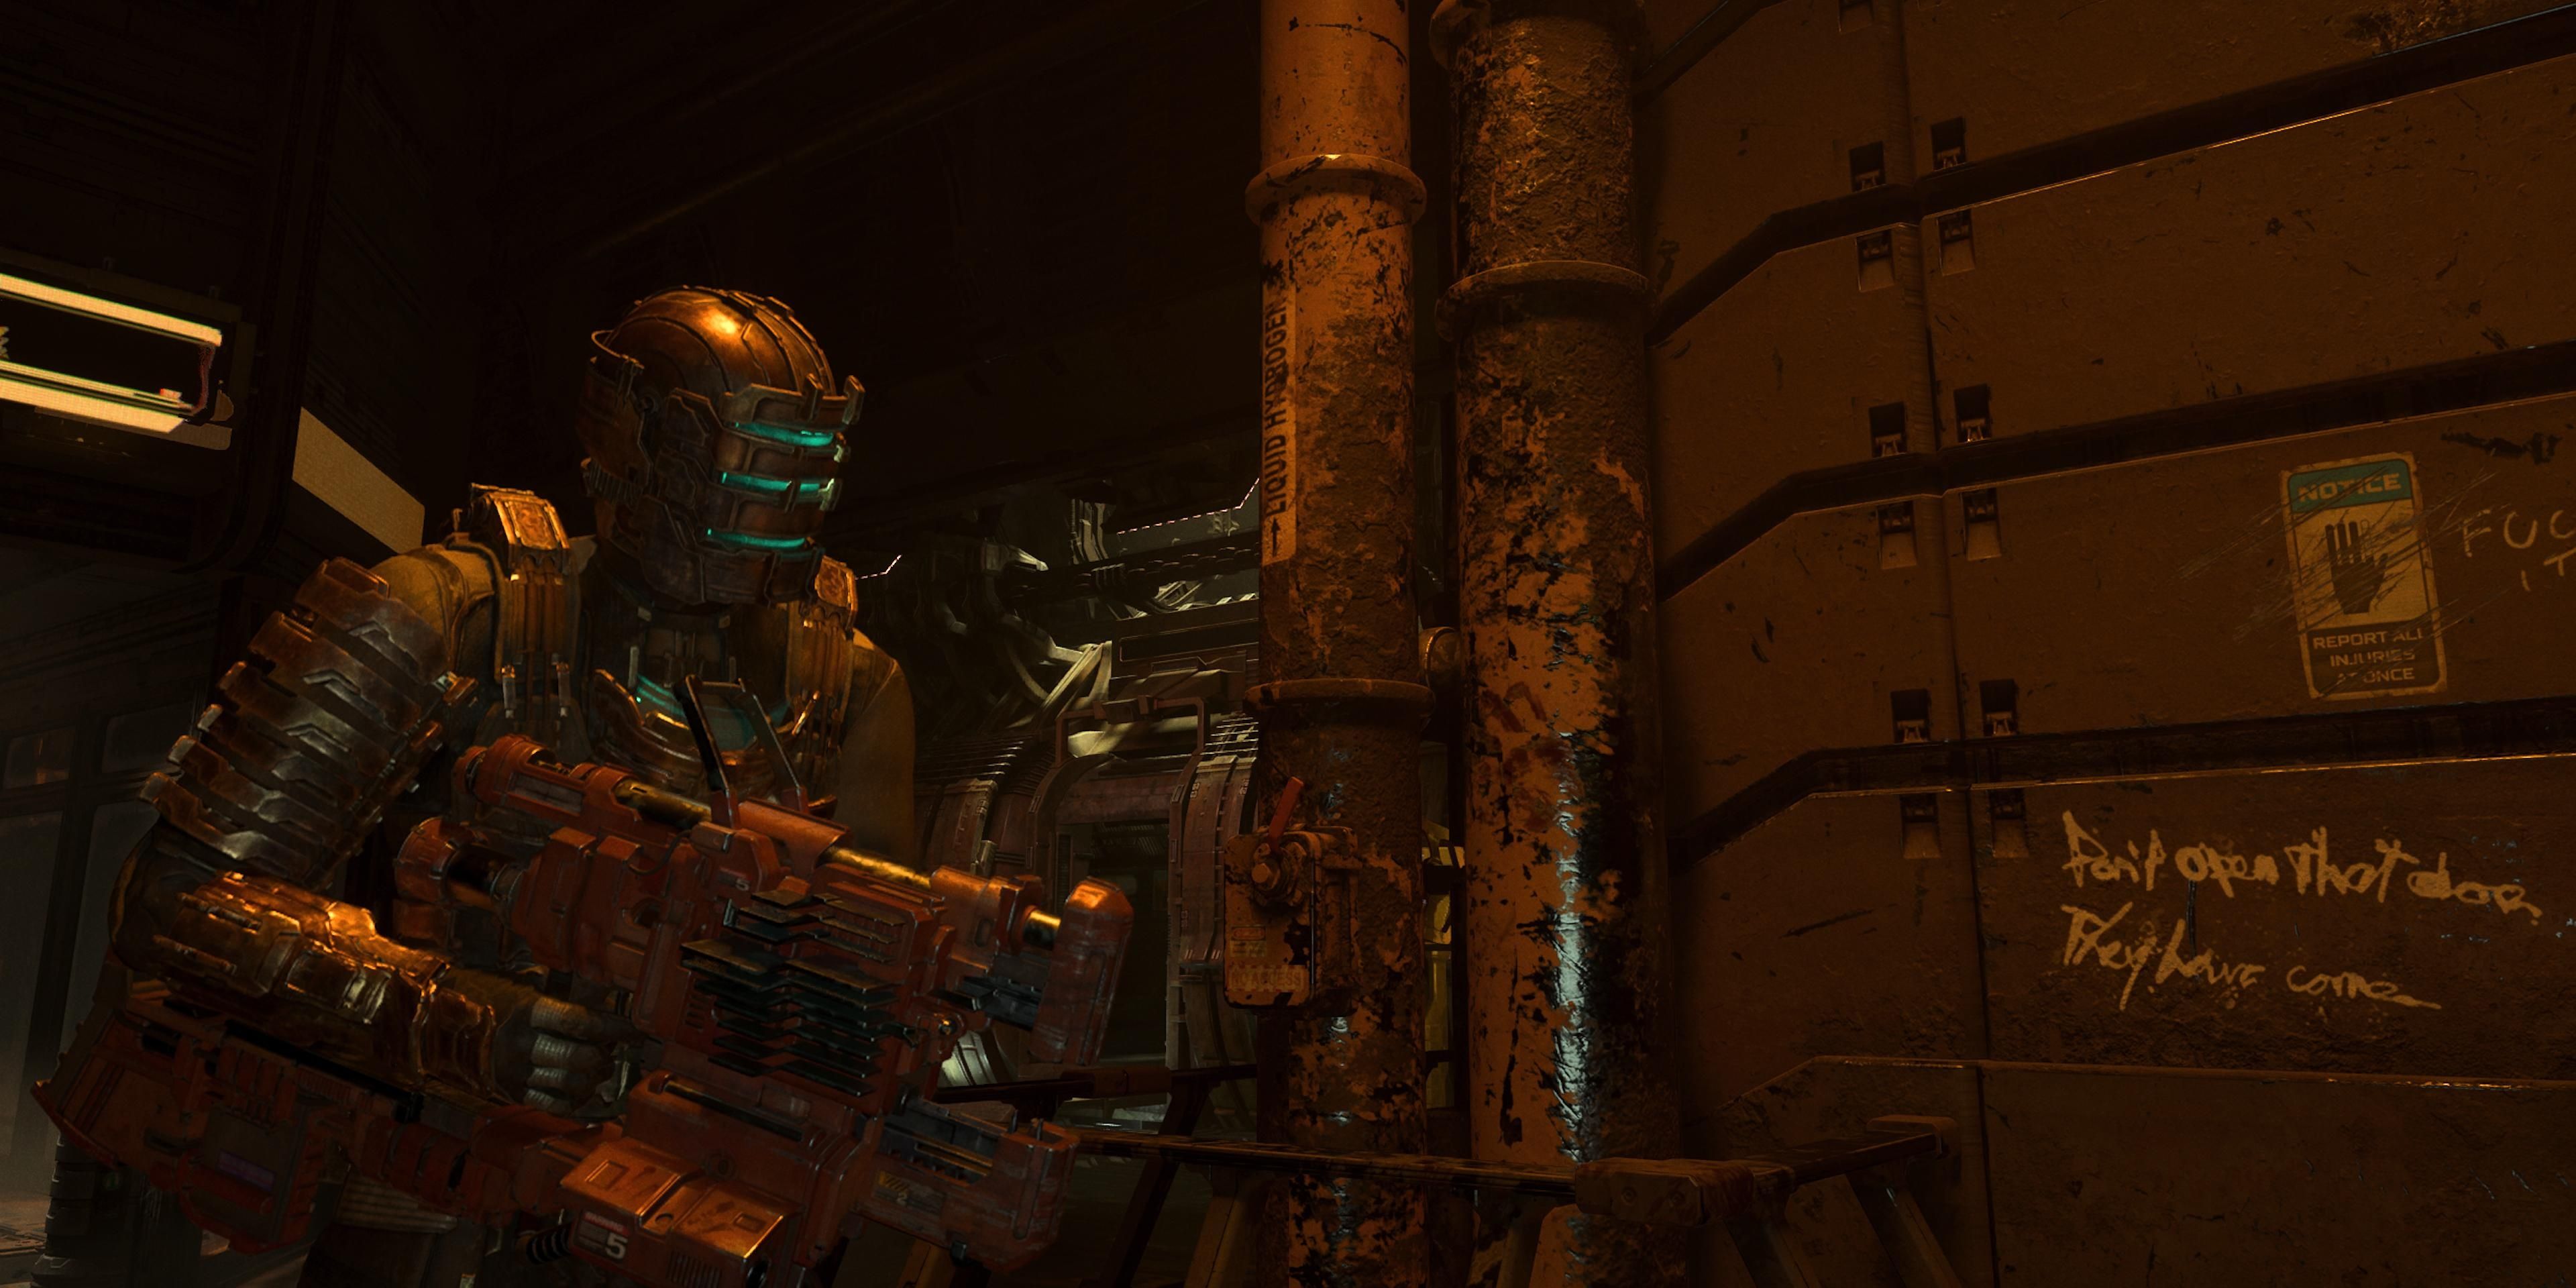 Isaac caring the contact beam in Dead Space